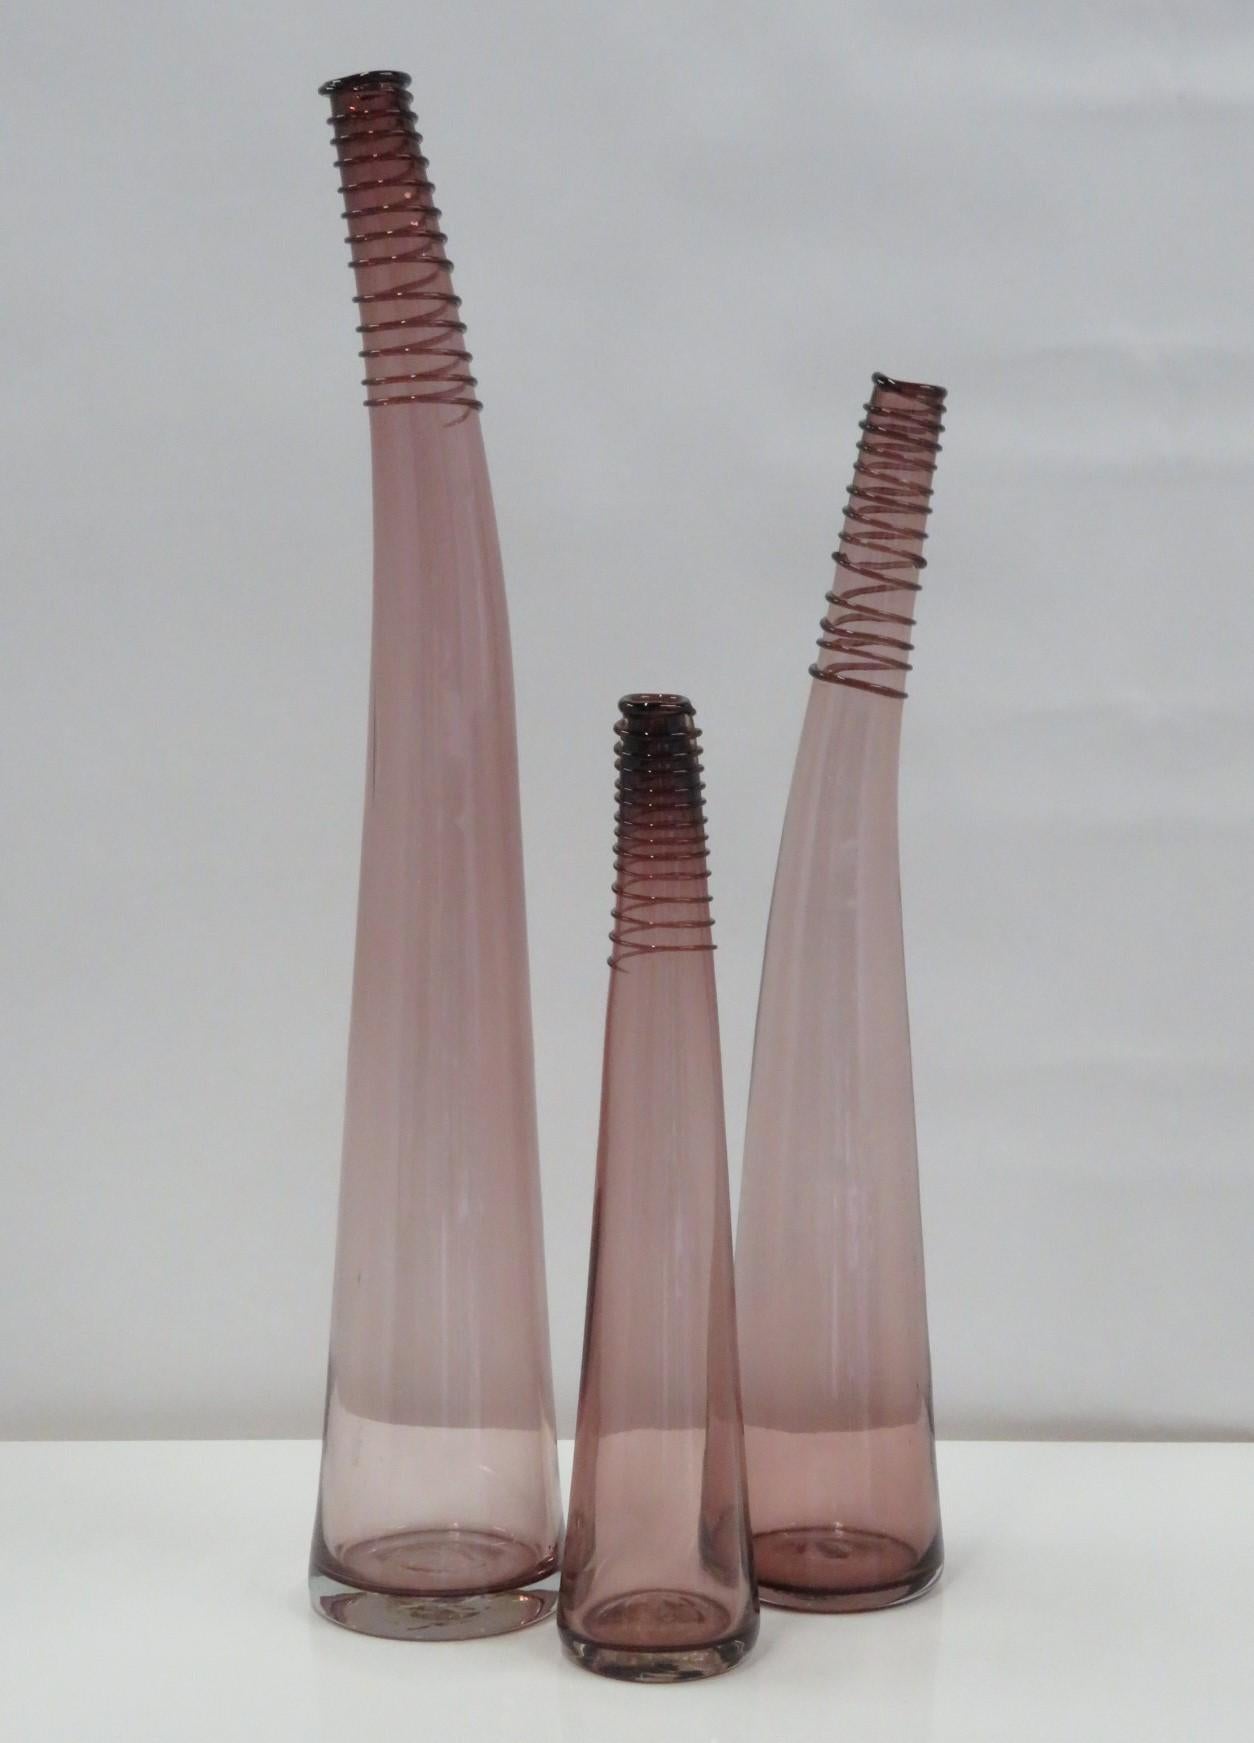 Blenko Set of 3 of Bent Spiral Neck Bottle Vases, in three heights, created by Don Shepherd in 1988. This designed makes its debut in the 1988 Blenko catalog and assigned number 8827 l/m/s depending on the height of the vessel. Beautiful purple